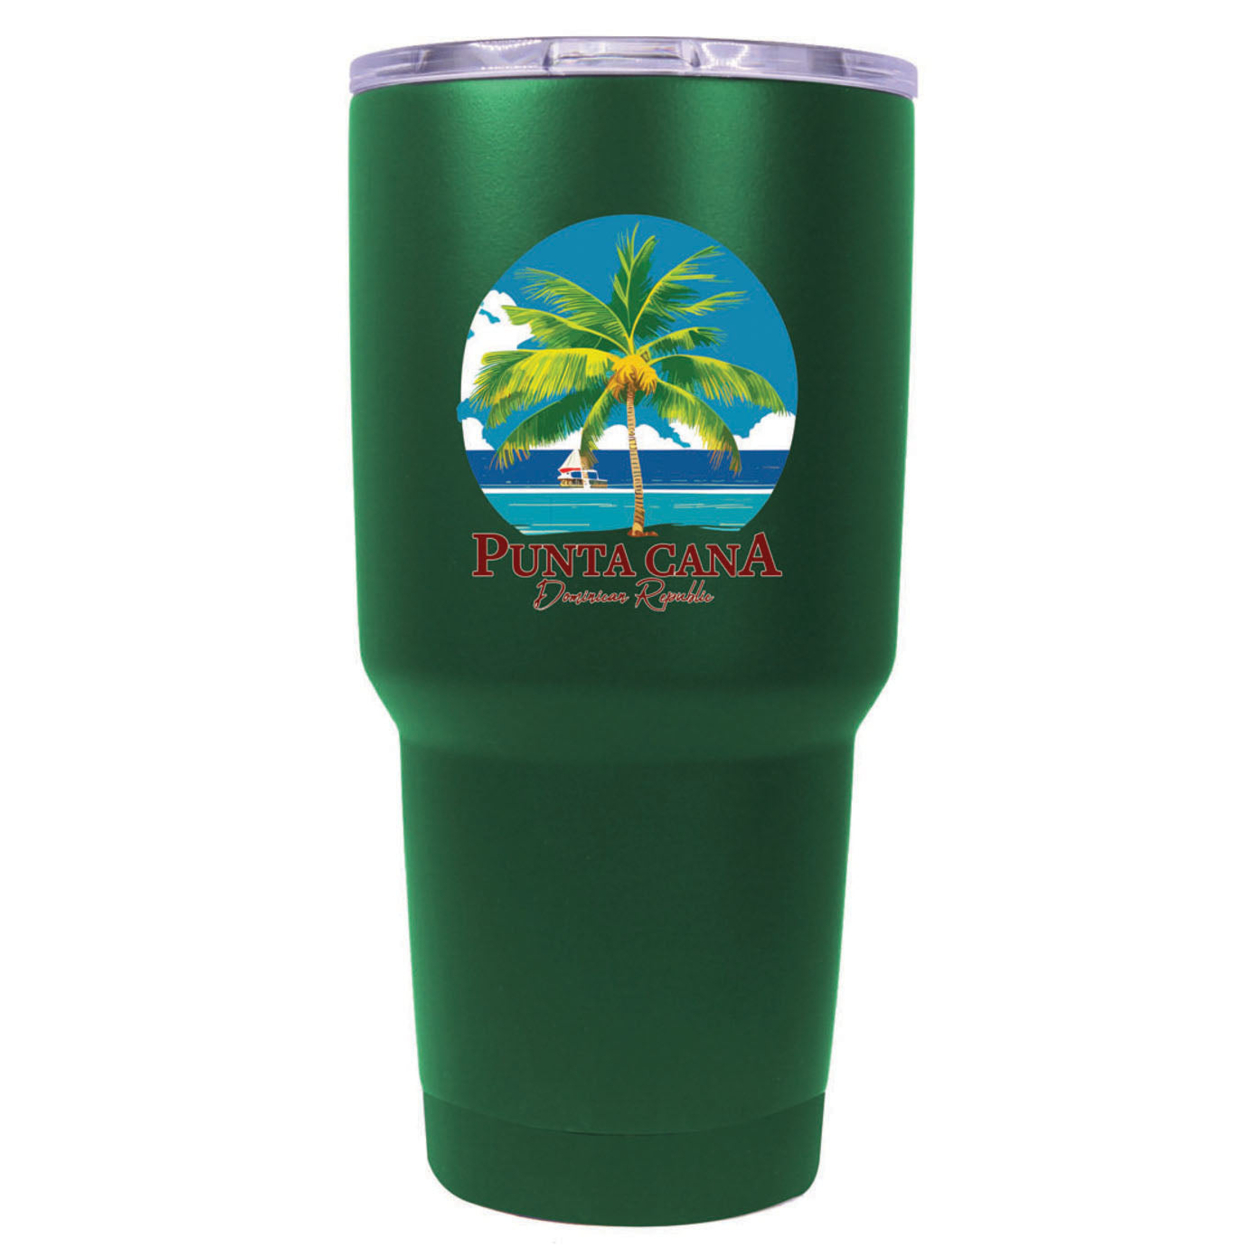 Punta Cana Dominican Republic Souvenir 24 Oz Insulated Stainless Steel Tumbler - Coral, PARROT B